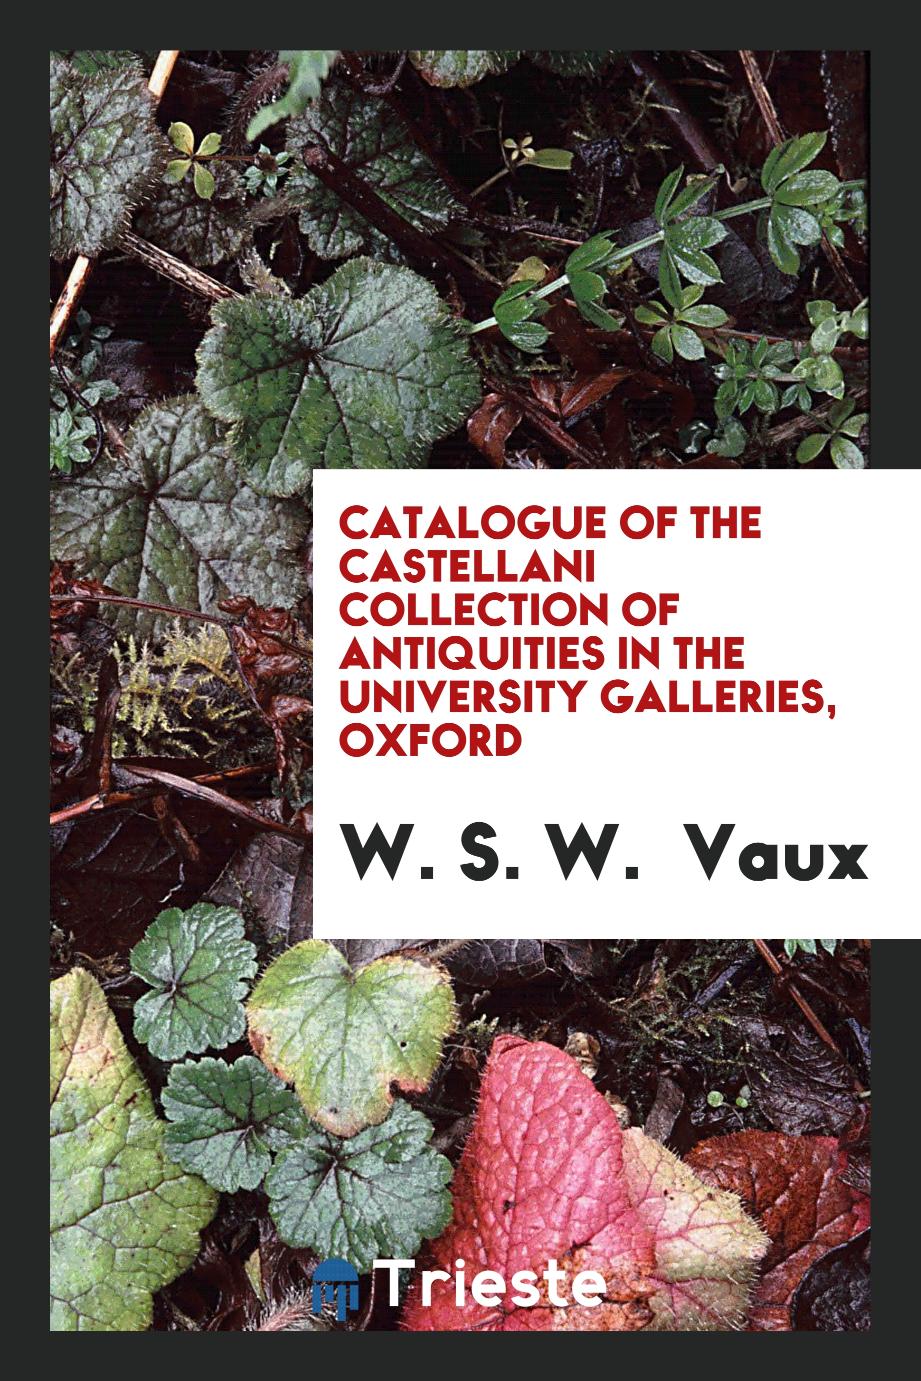 Catalogue of the Castellani collection of antiquities in the University Galleries, Oxford